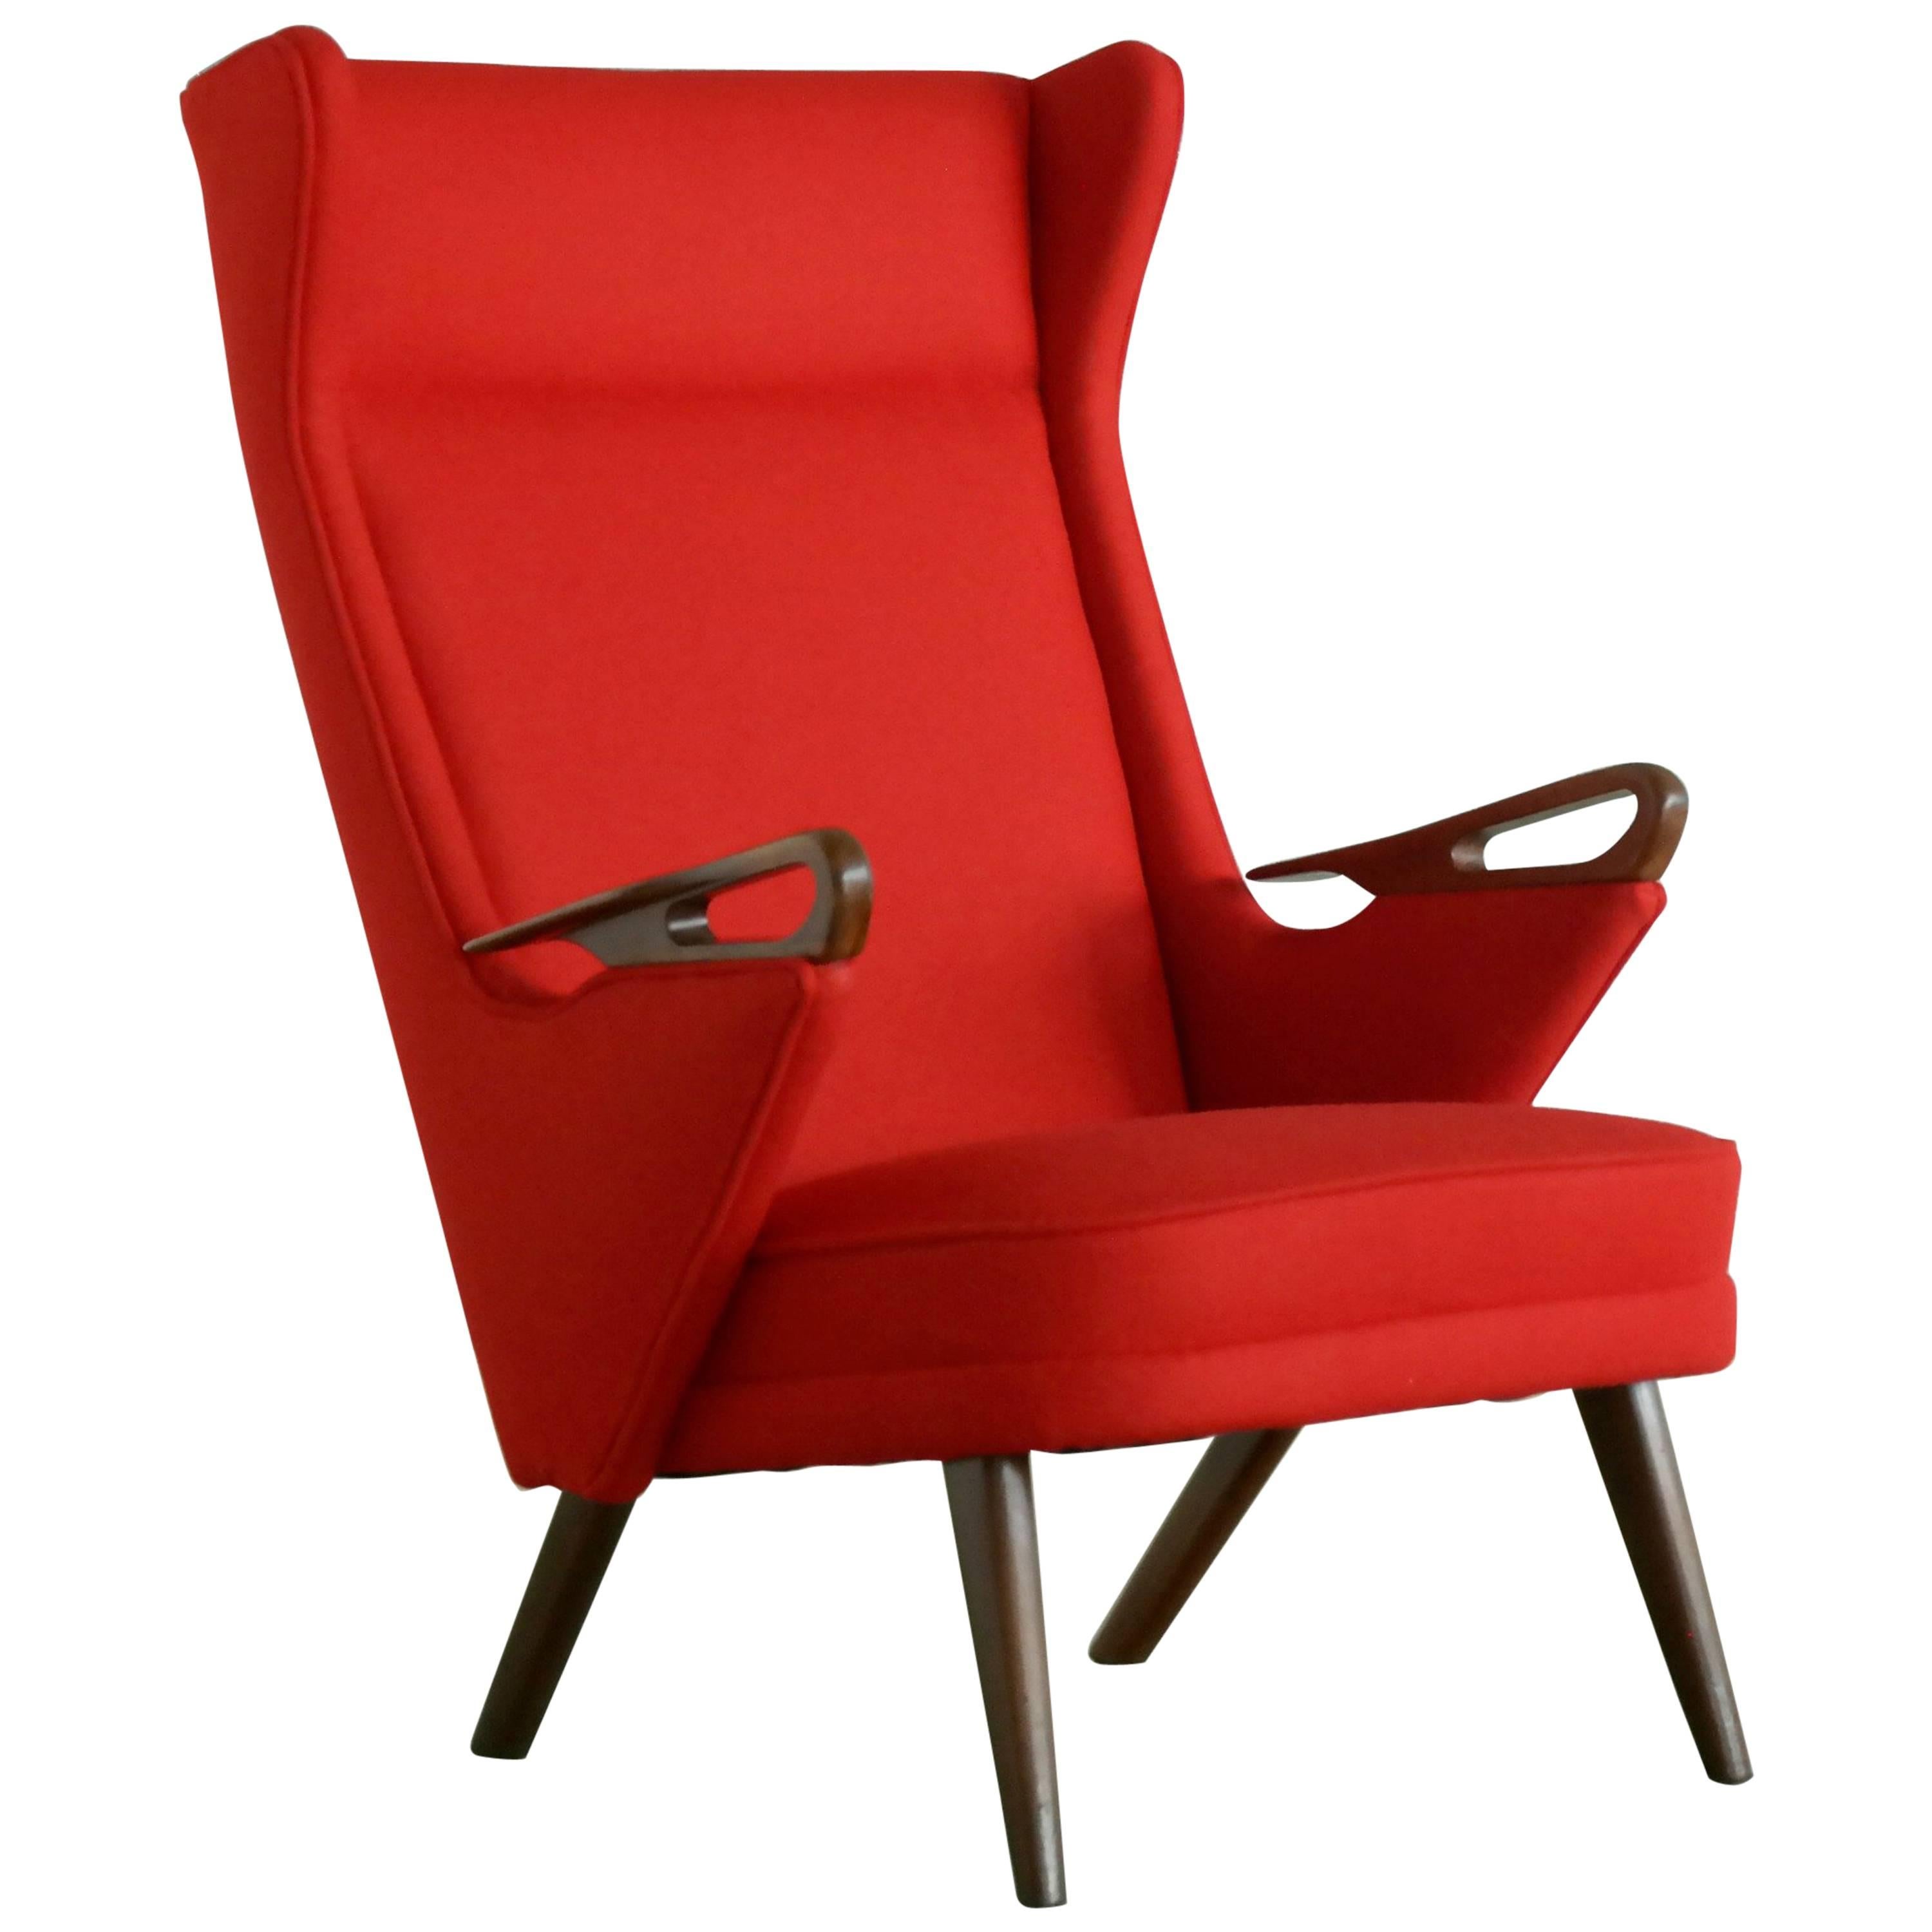 Svend Skipper Attributed 1950s Papa Bear Style Lounge Chair